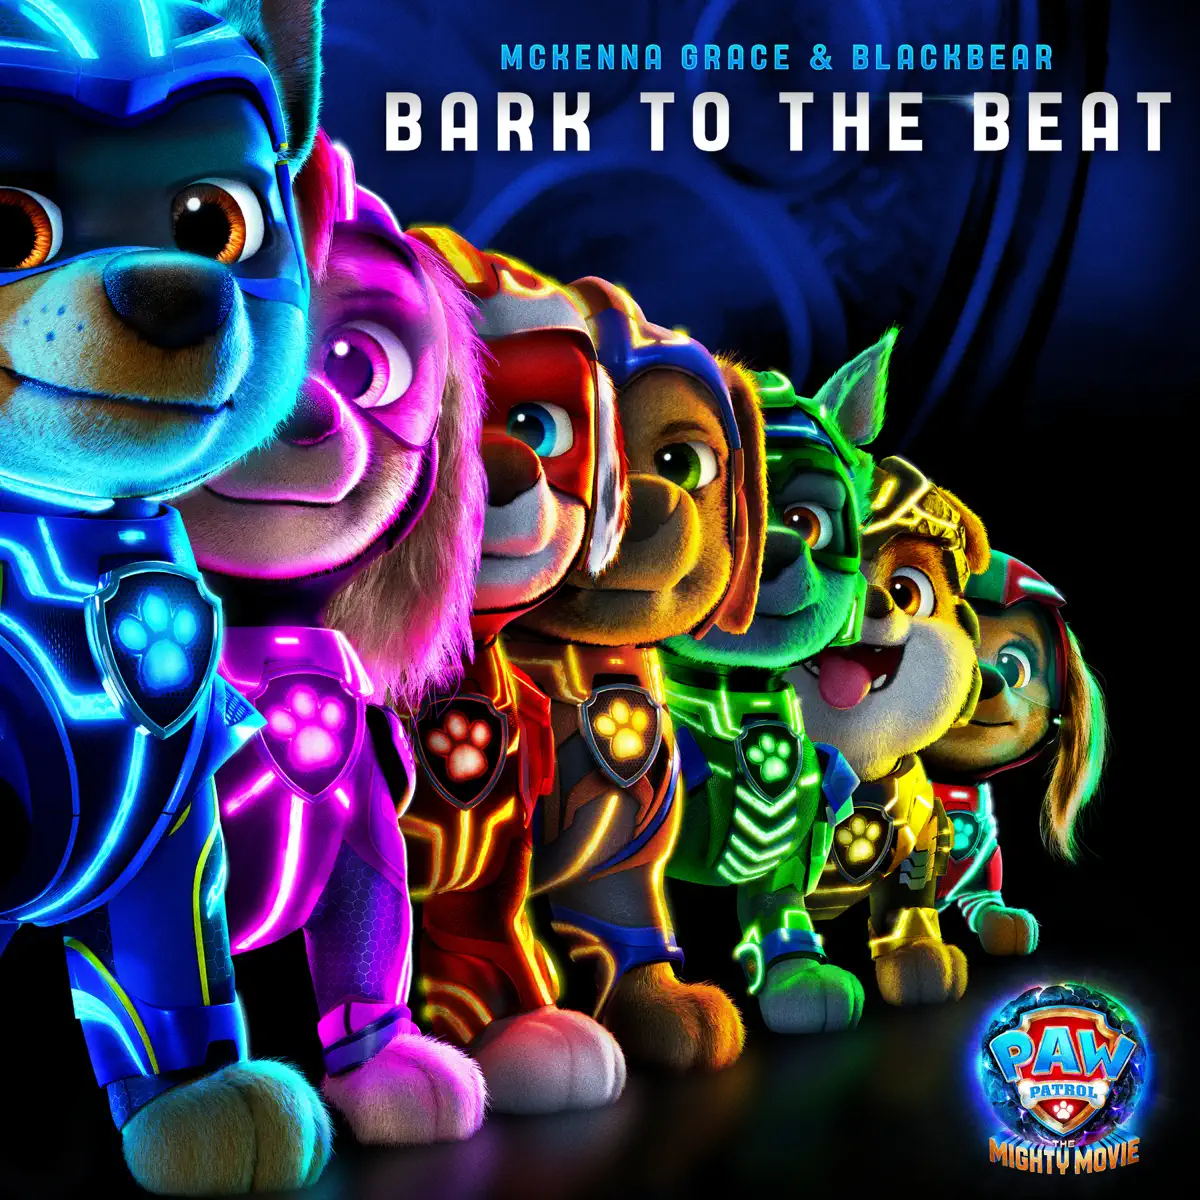 Mckenna Grace & blackbear - Bark to the Beat (From "PAW Patrol: The Mighty Movie") - Single (2023) [iTunes Plus AAC M4A]-新房子